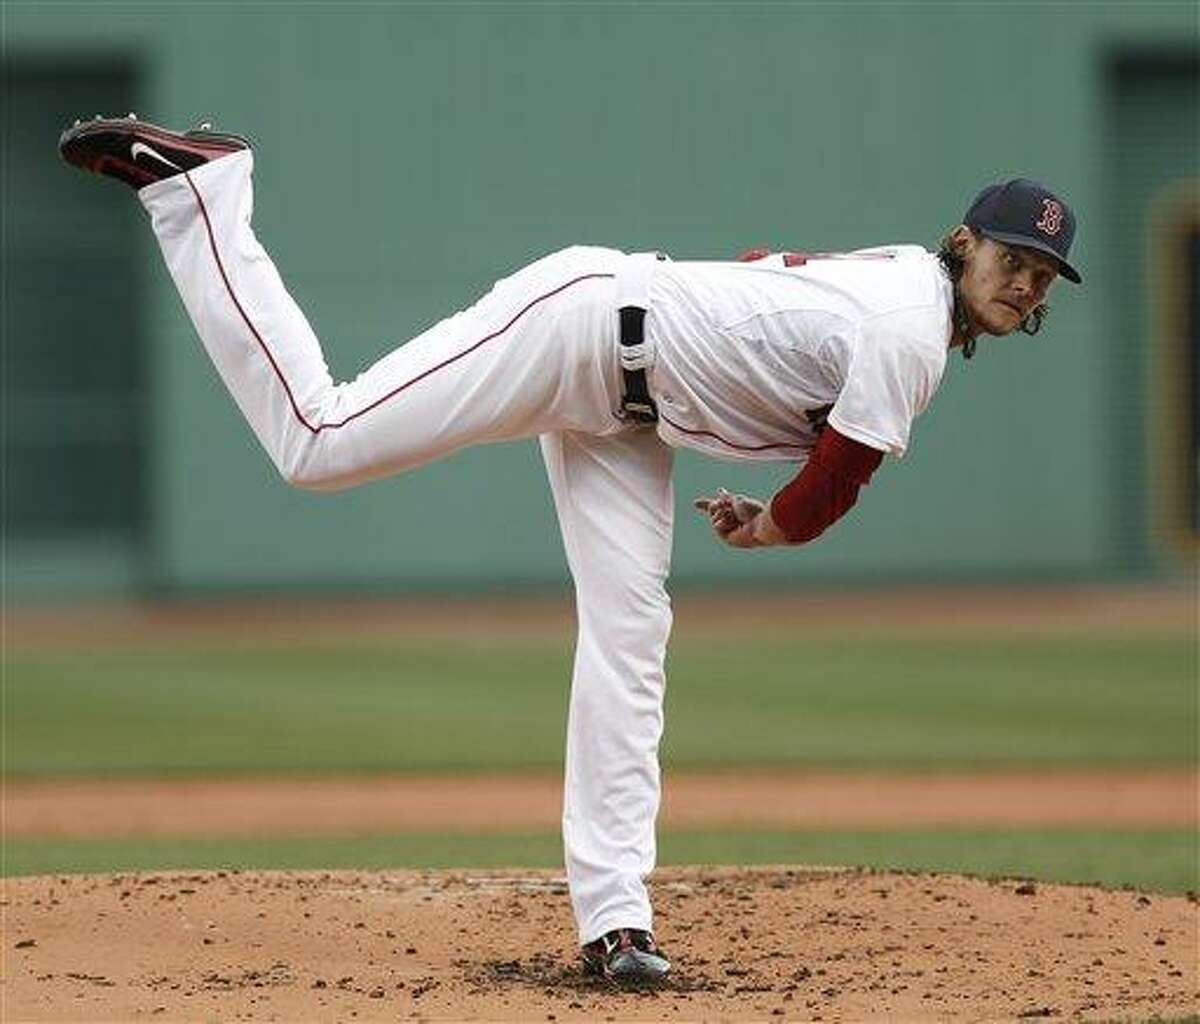 Boston Red Sox starting pitcher Clay Buchholz delivers against the Tampa Bay Rays during the first inning of a baseball game at Fenway Park in Boston Sunday, April 14, 2013. (AP Photo/Winslow Townson)